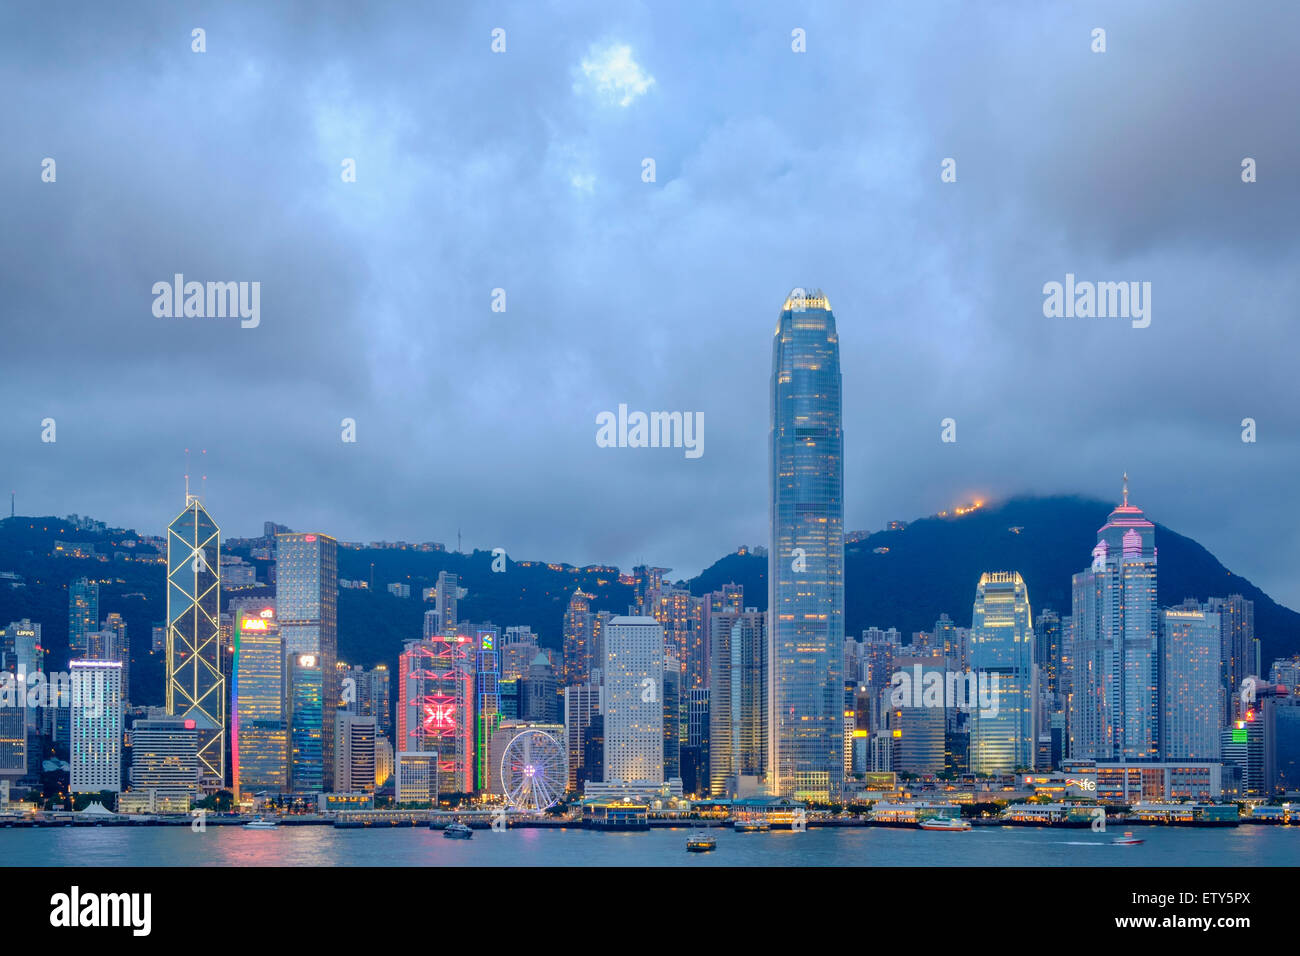 Dusk skyline of skyscrapers in Hong Kong from Kowloon on a clear day Stock Photo